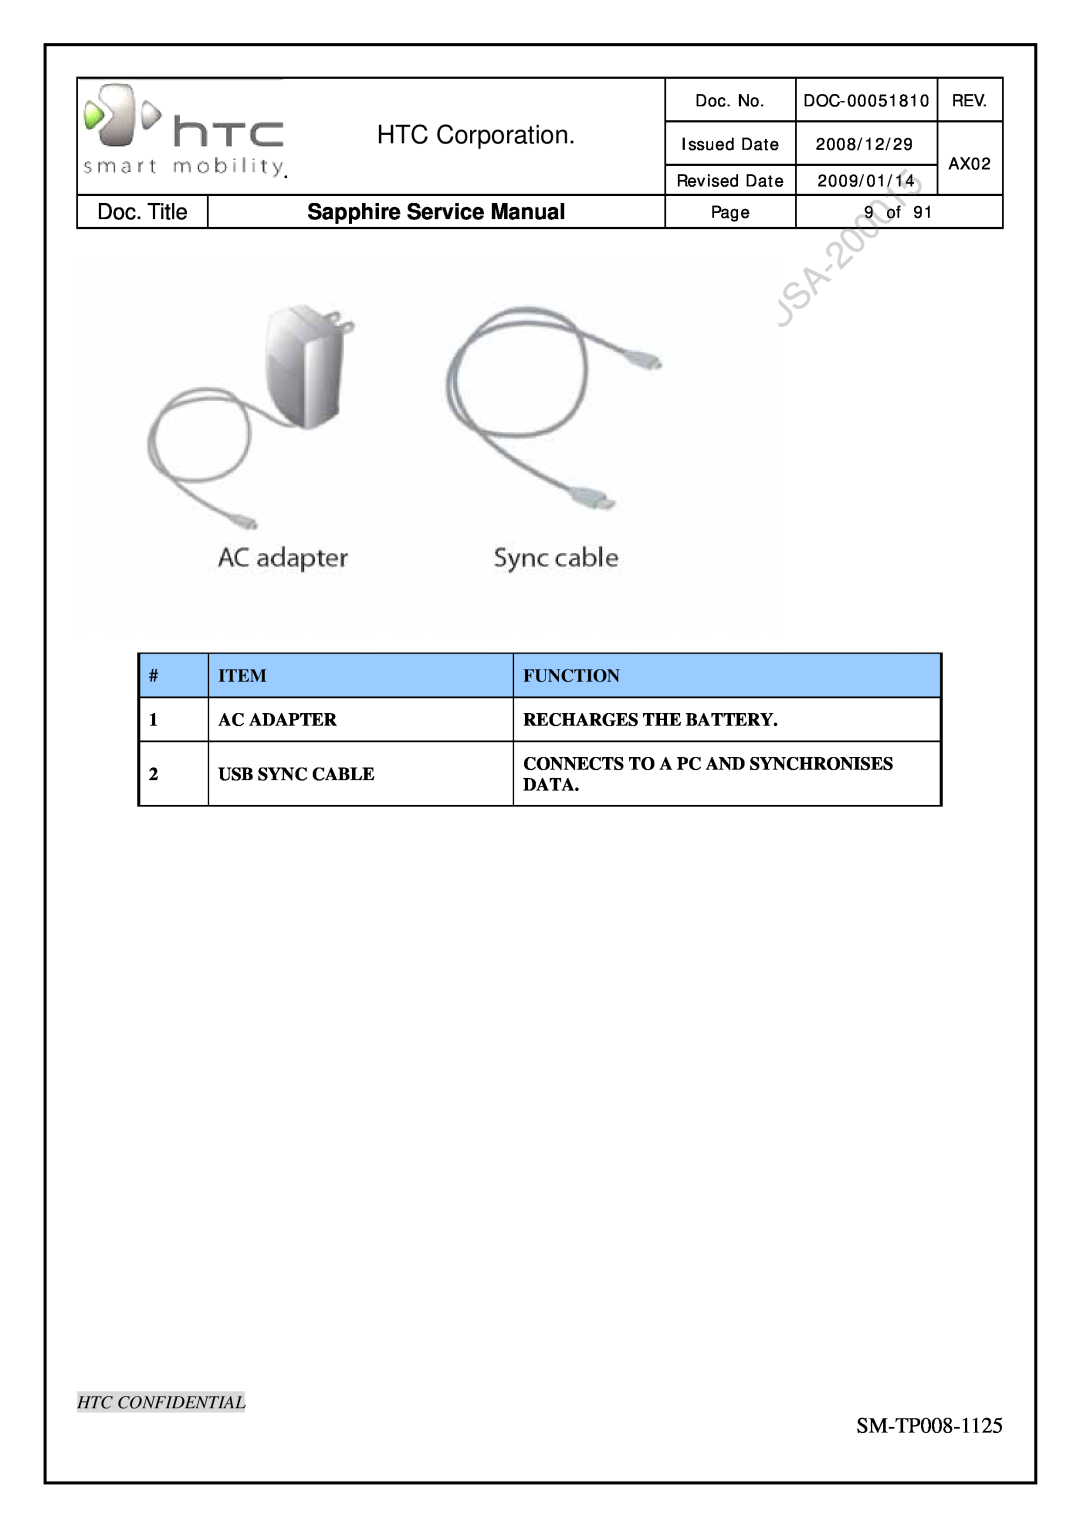 HTC SM-TP008-1125 HTC Corporation, Sapphire Service Manual, Function, Ac Adapter, Recharges The Battery, Usb Sync Cable 